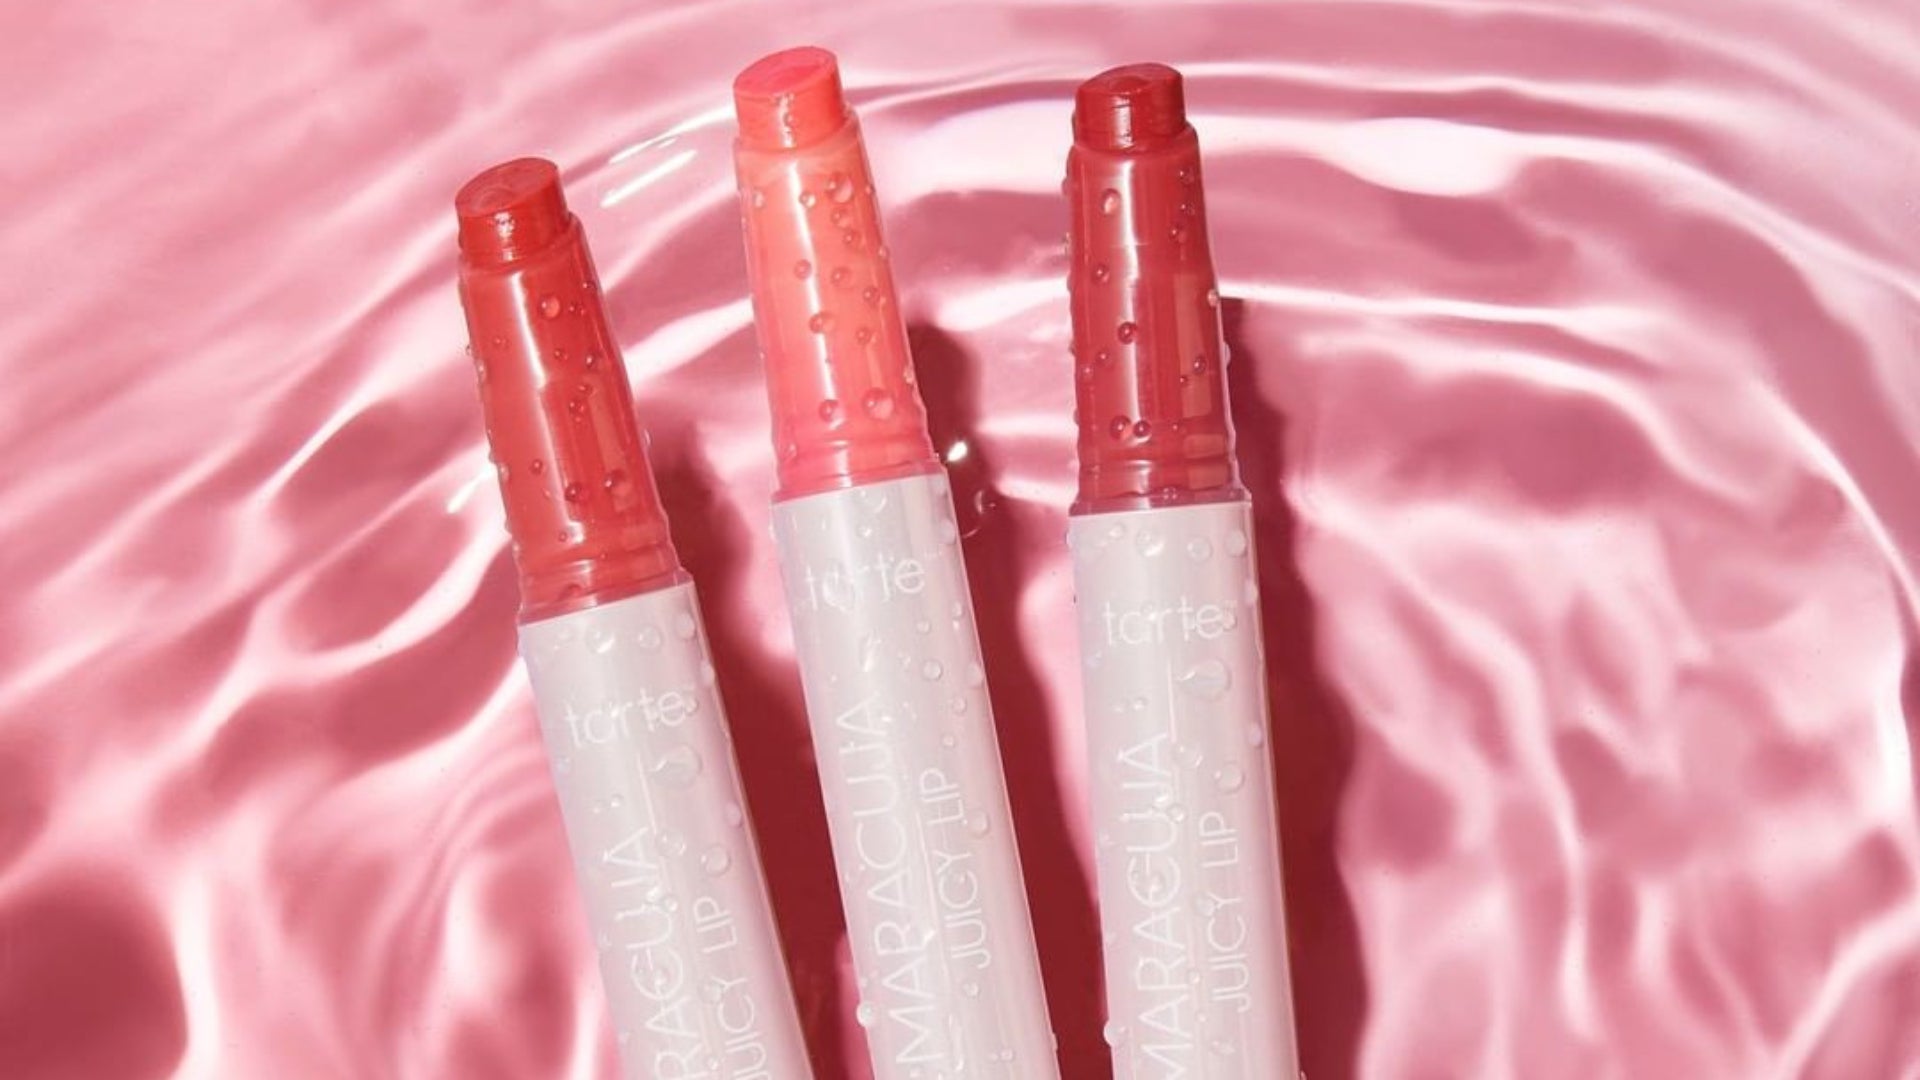 Introducing Your Newest Beauty Obsession – Tarte's Maracuja Juicy Lip Plump